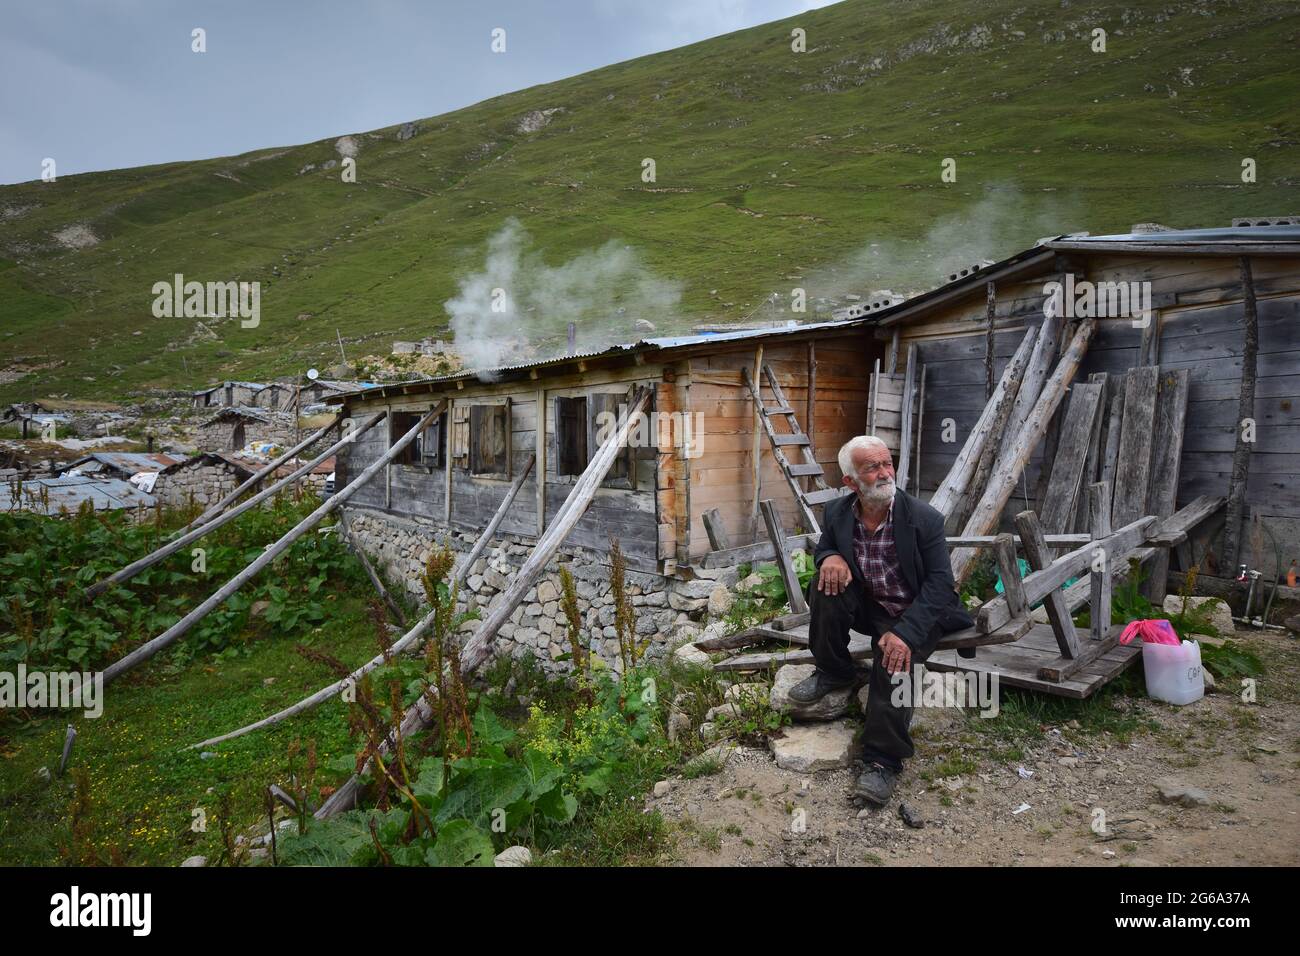 Rize, TURKEY - July 31, 2015: Avusor or Avusör is a plateau in the Çamlıhemşin district of Rize province. Old man sitting in front of his house in the Stock Photo